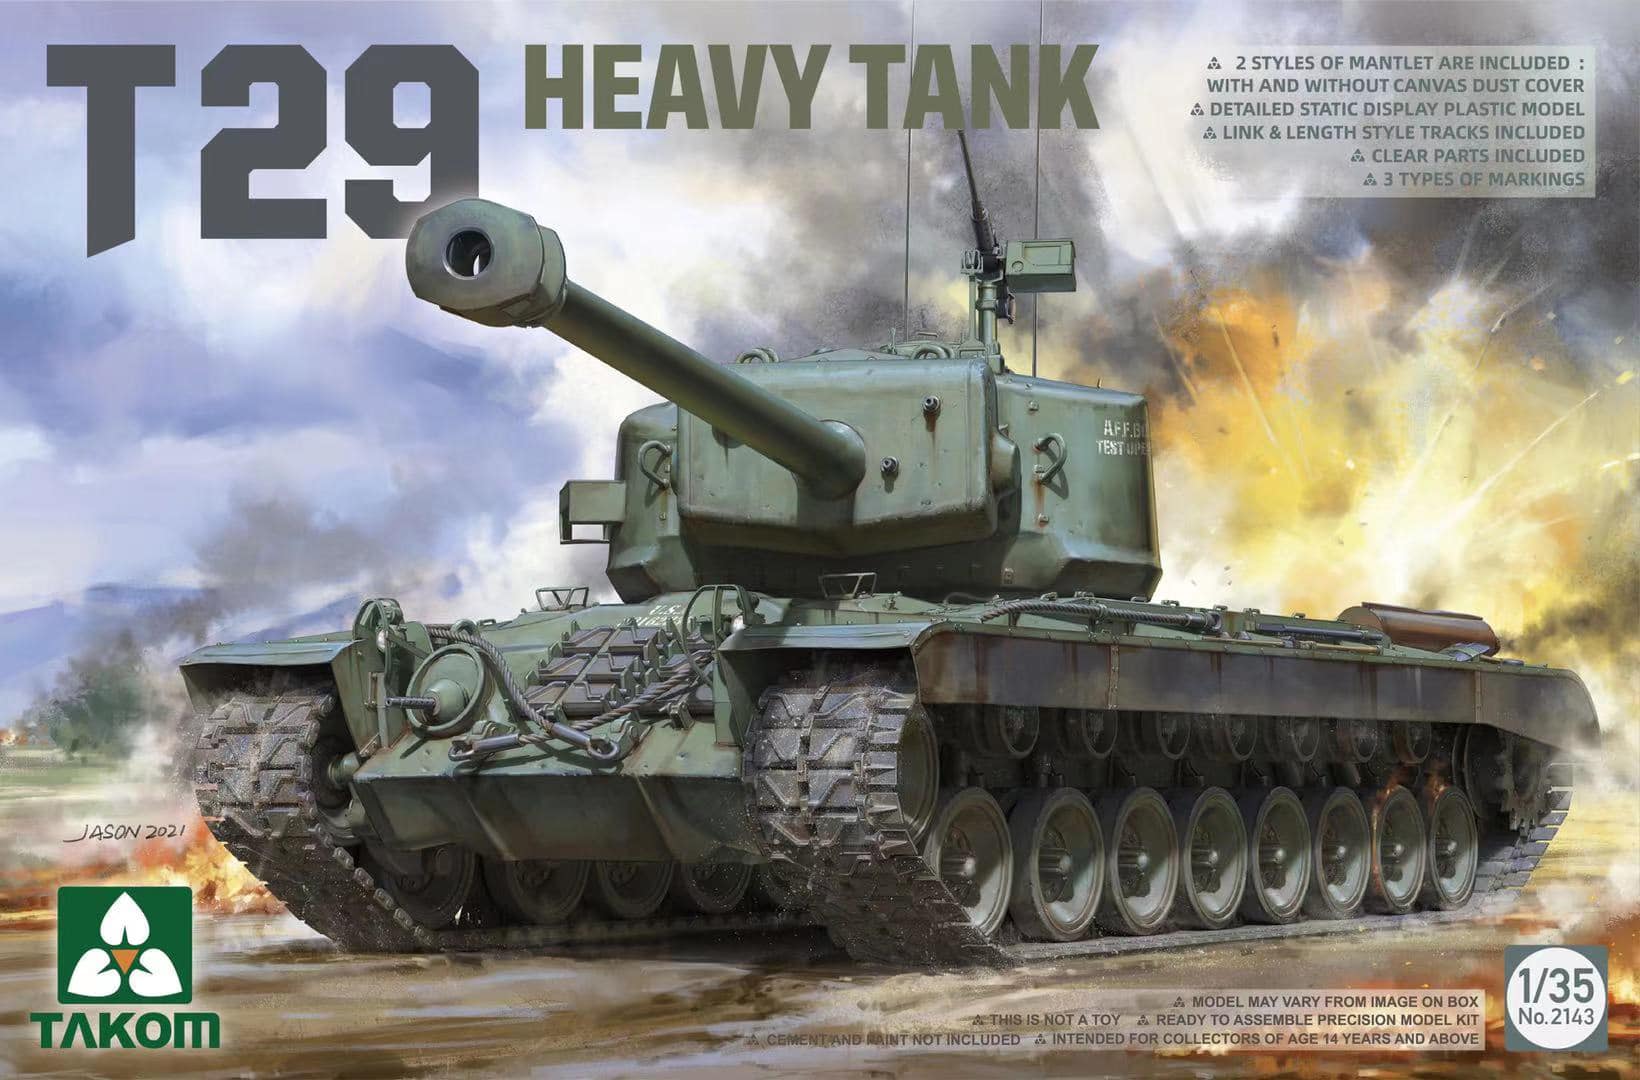 How to build the best plastic model tank kits